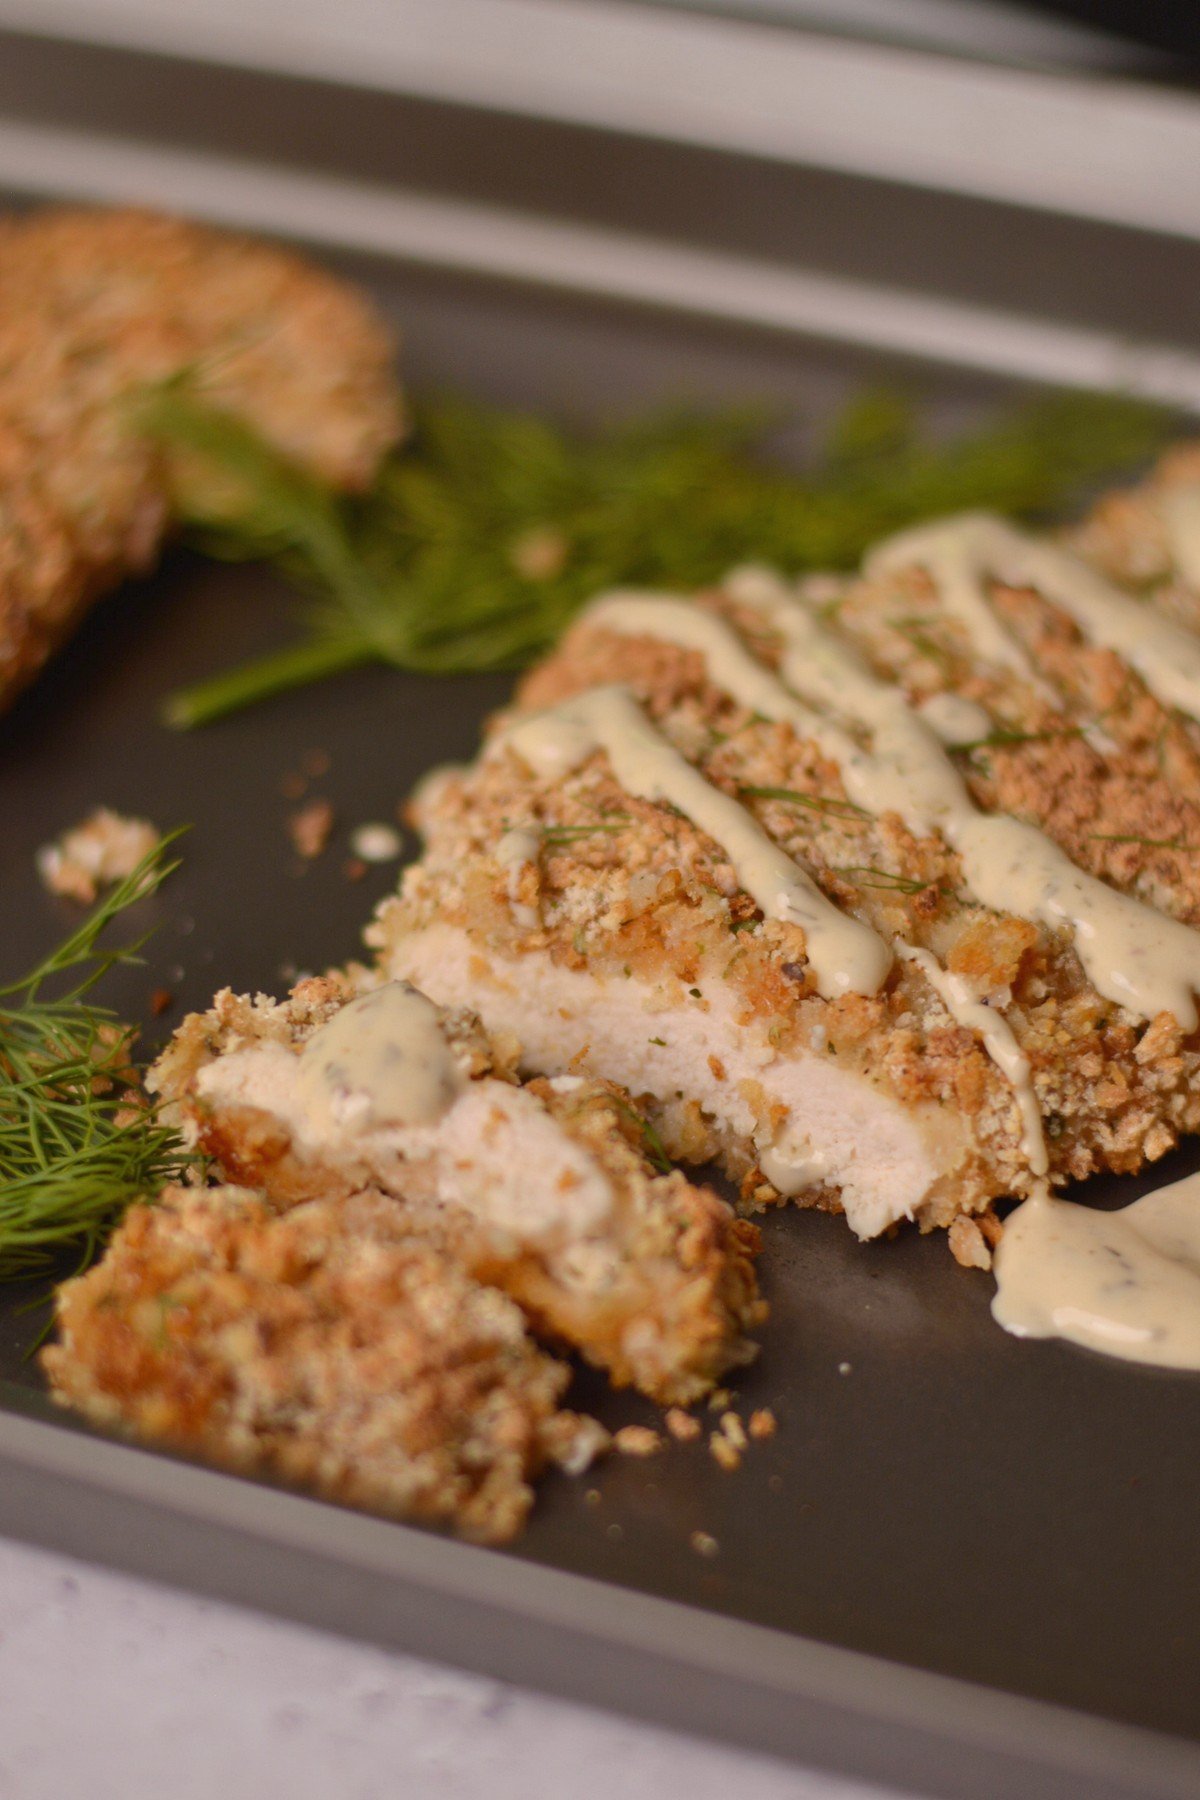 Panko crusted chicken breast cut into pieces with ranch on top.